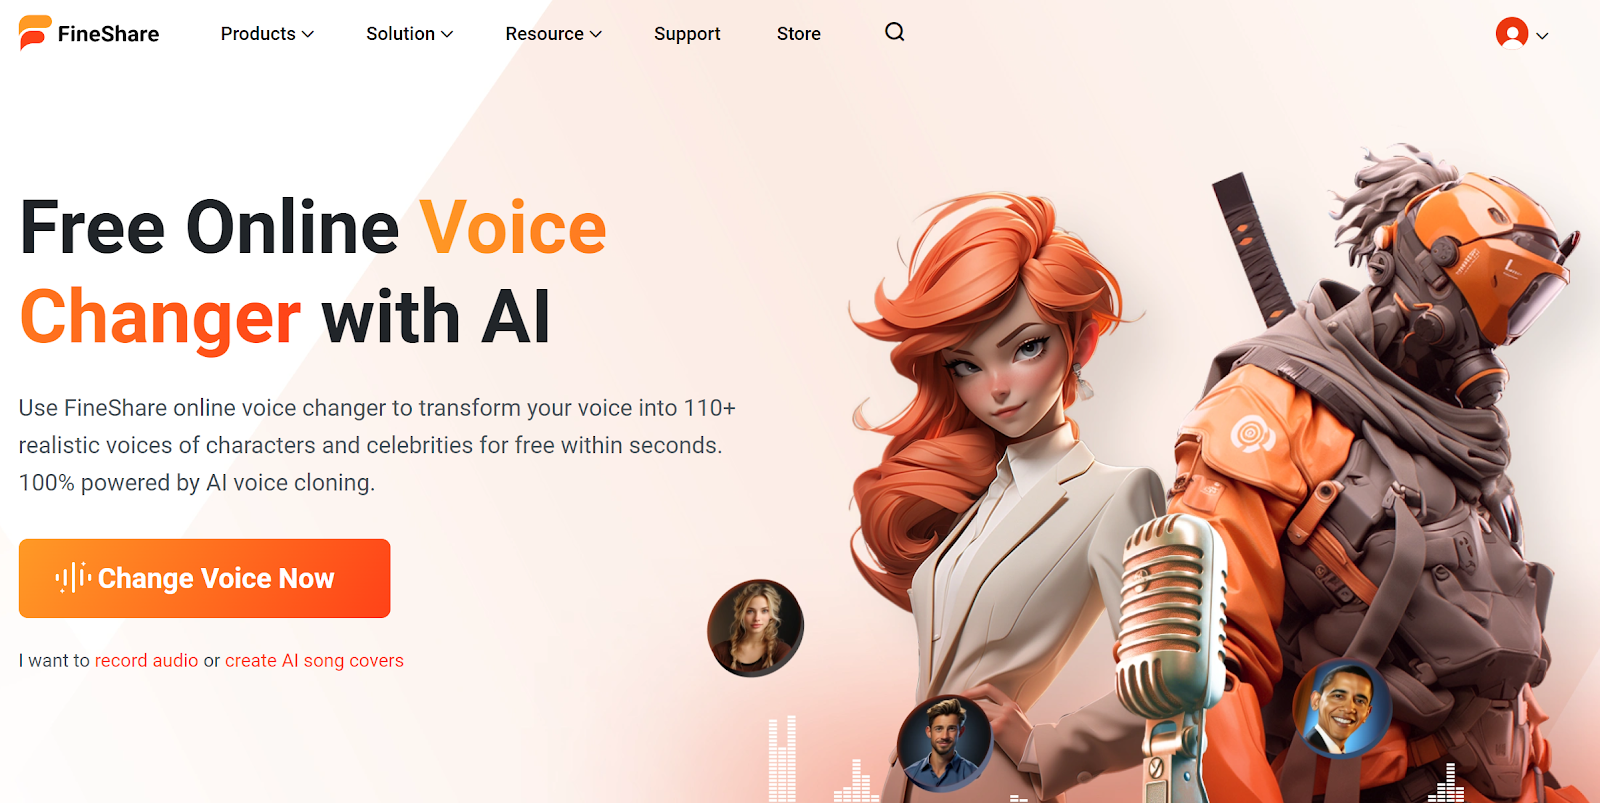 FineShare's Online Voice Changer landing page.